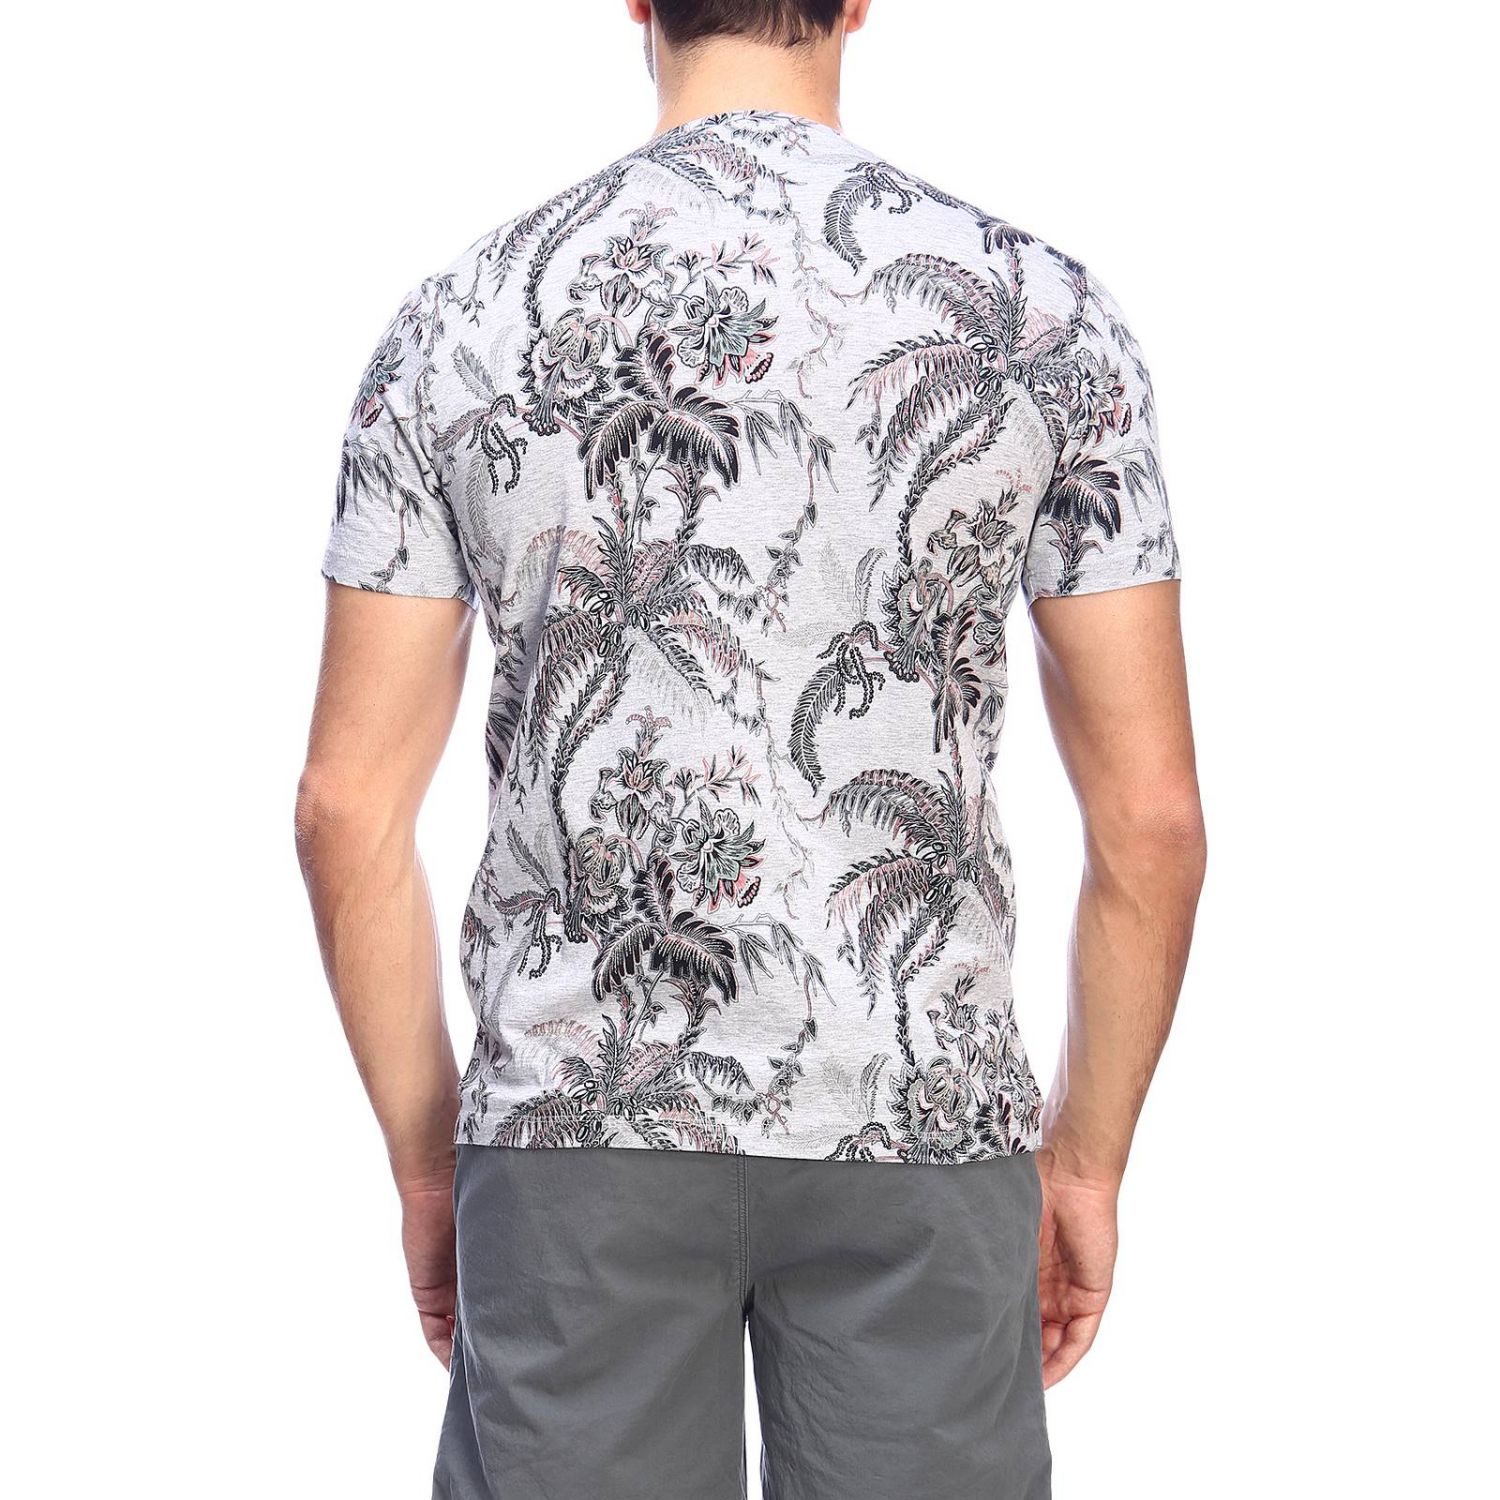 Etro Outlet: t-shirt for man - Grey | Etro t-shirt 1Y020 4170 online on ...